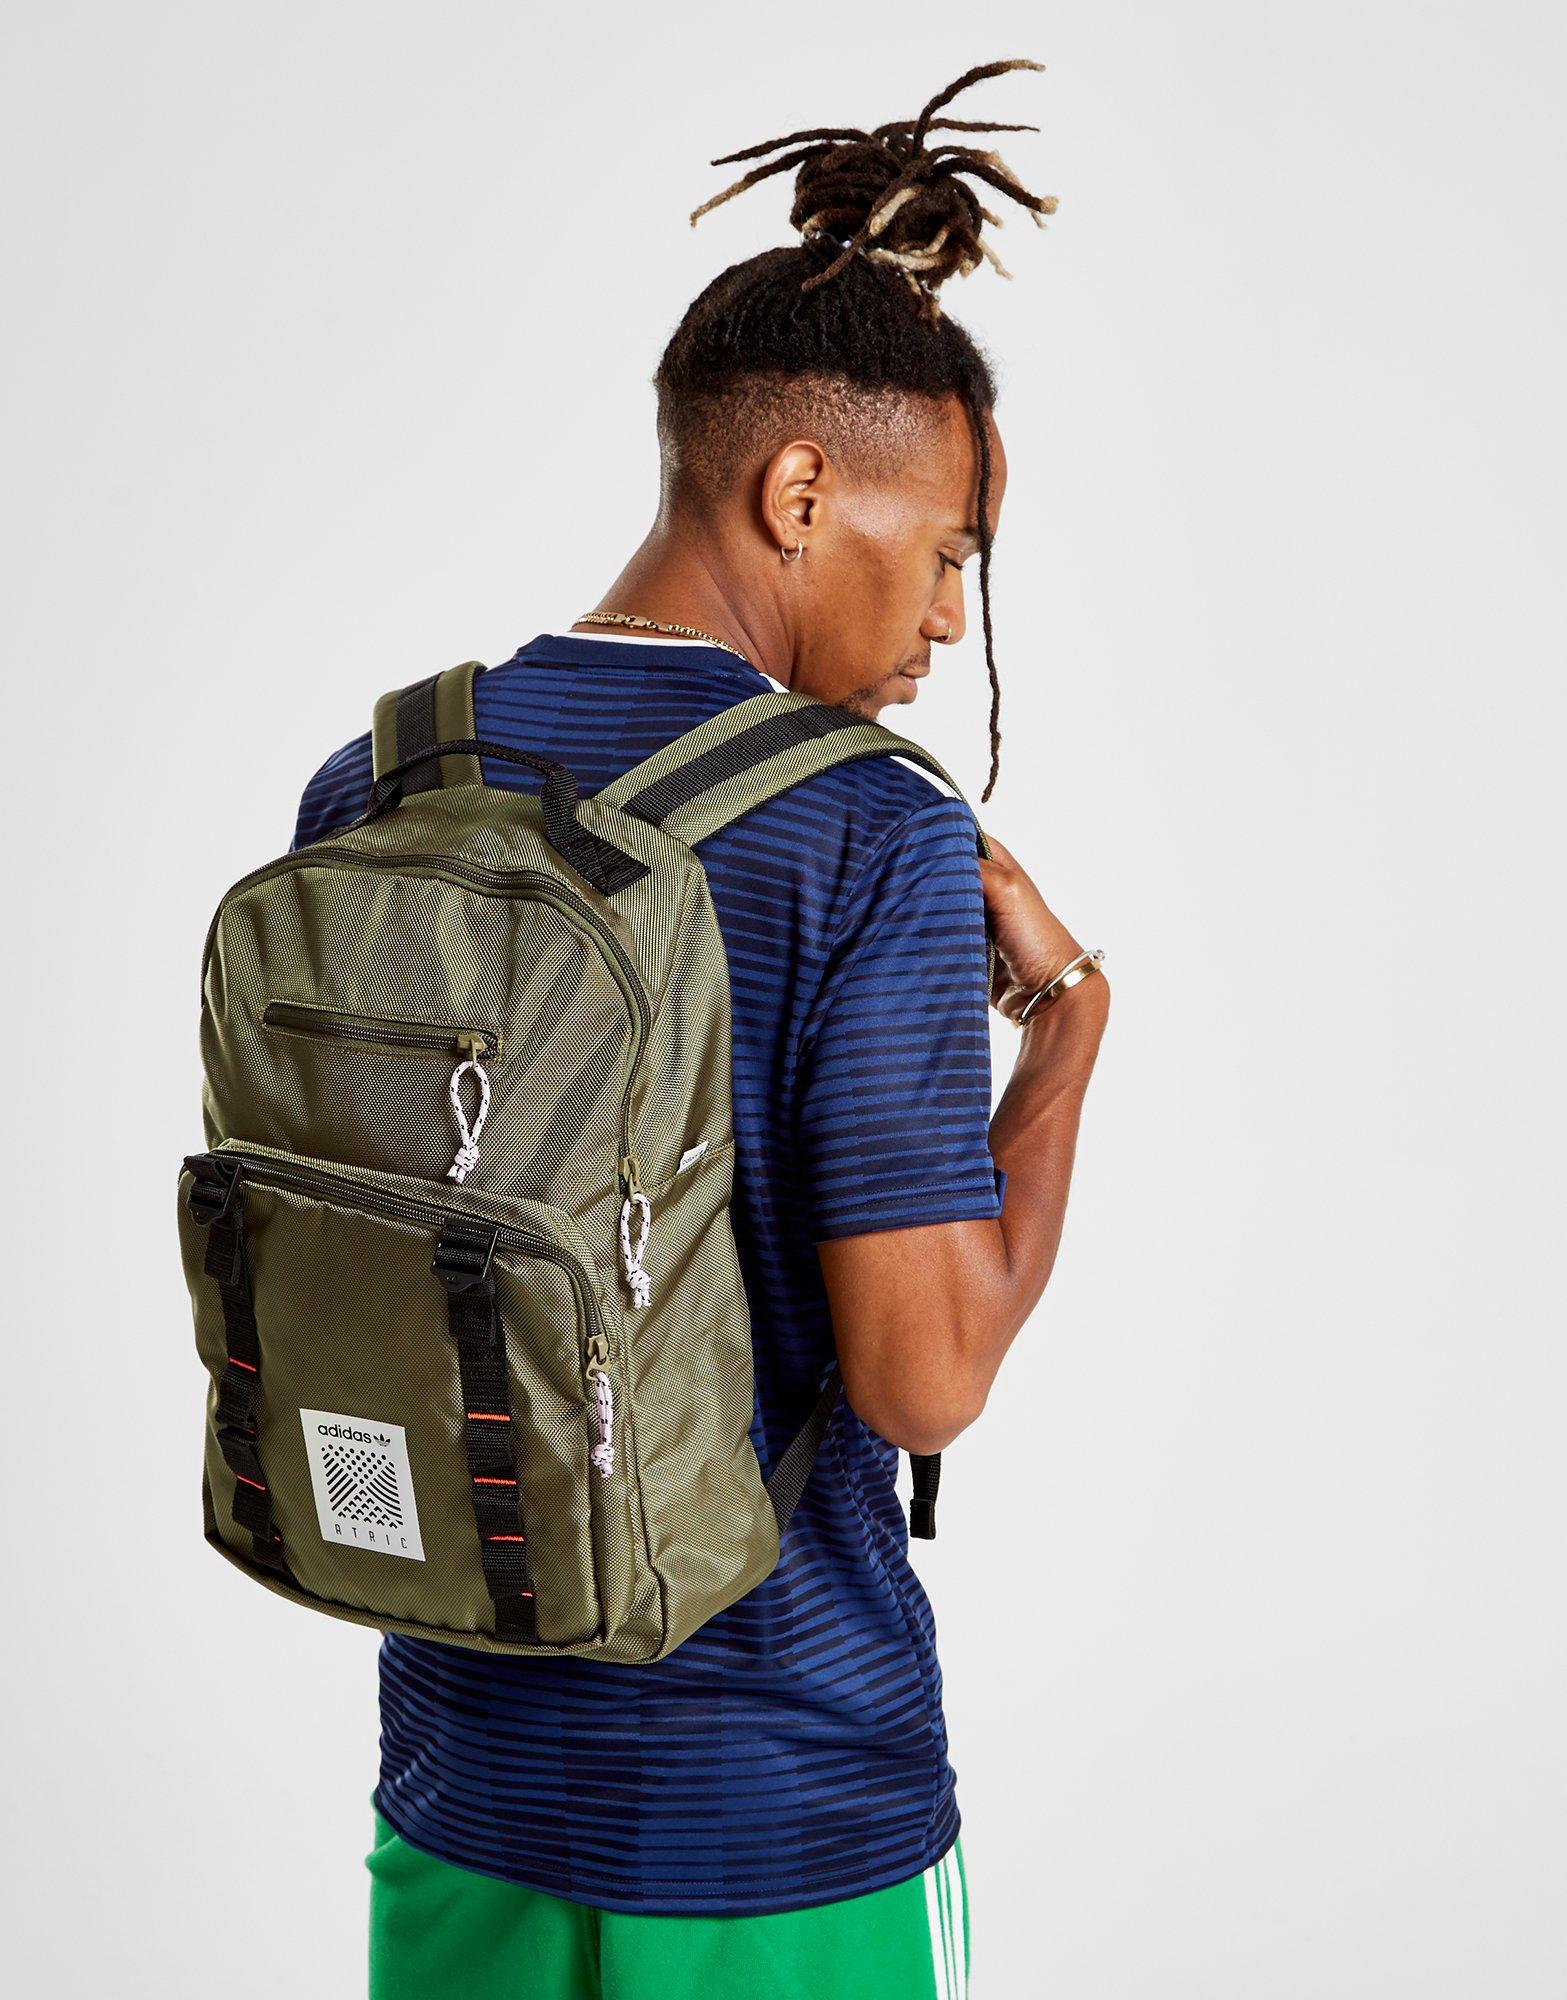 adidas backpack olive green